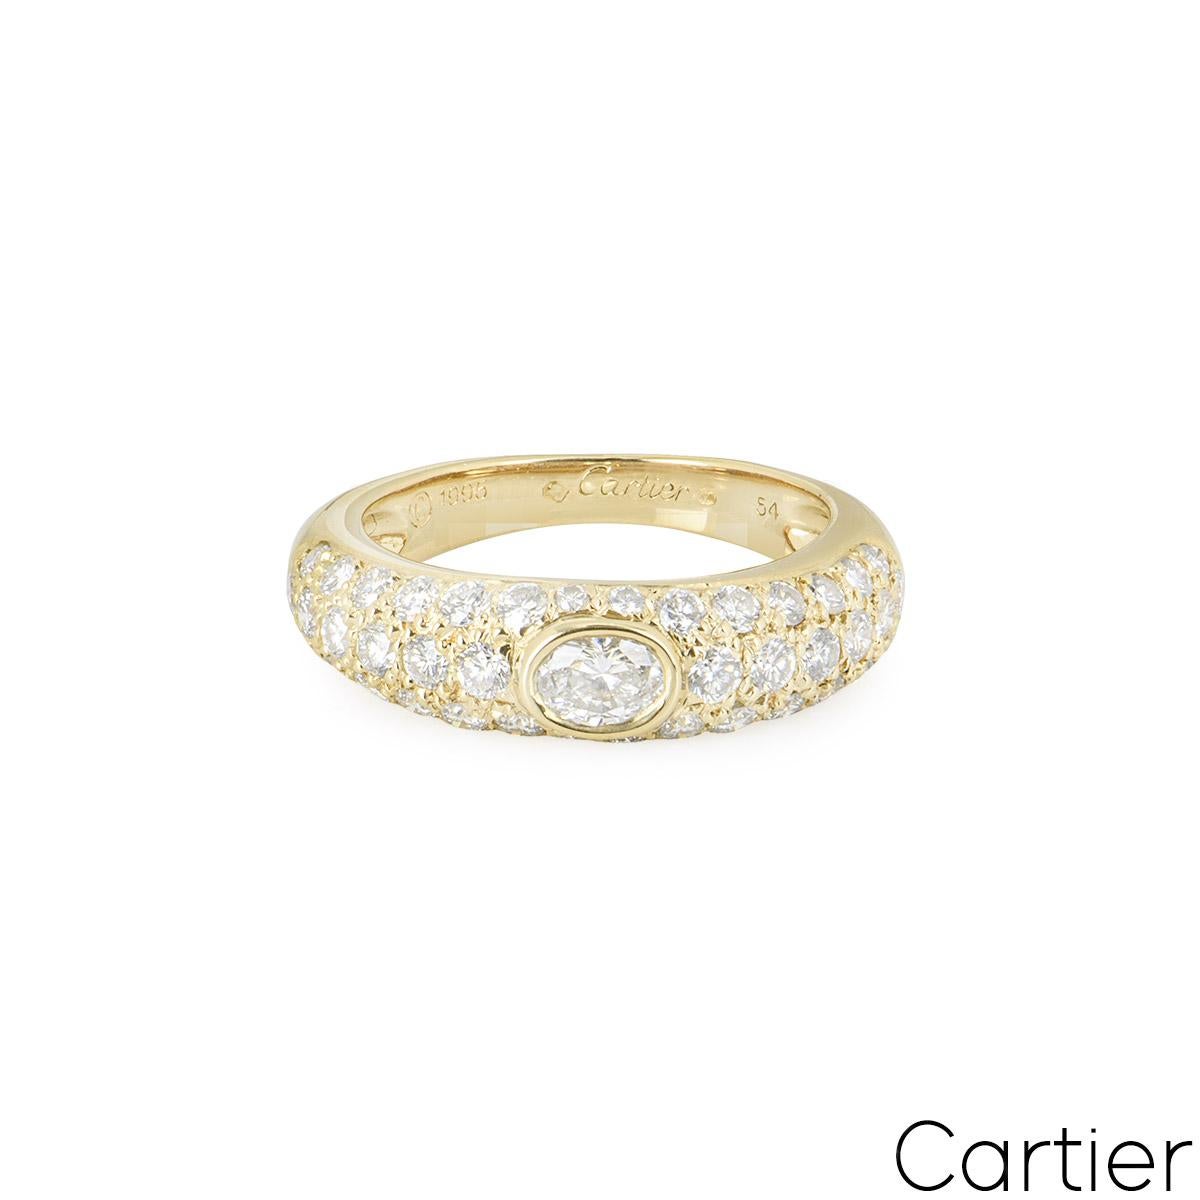 Contemporary Cartier Yellow Gold Diamond Mimi Ring Size 54 For Sale